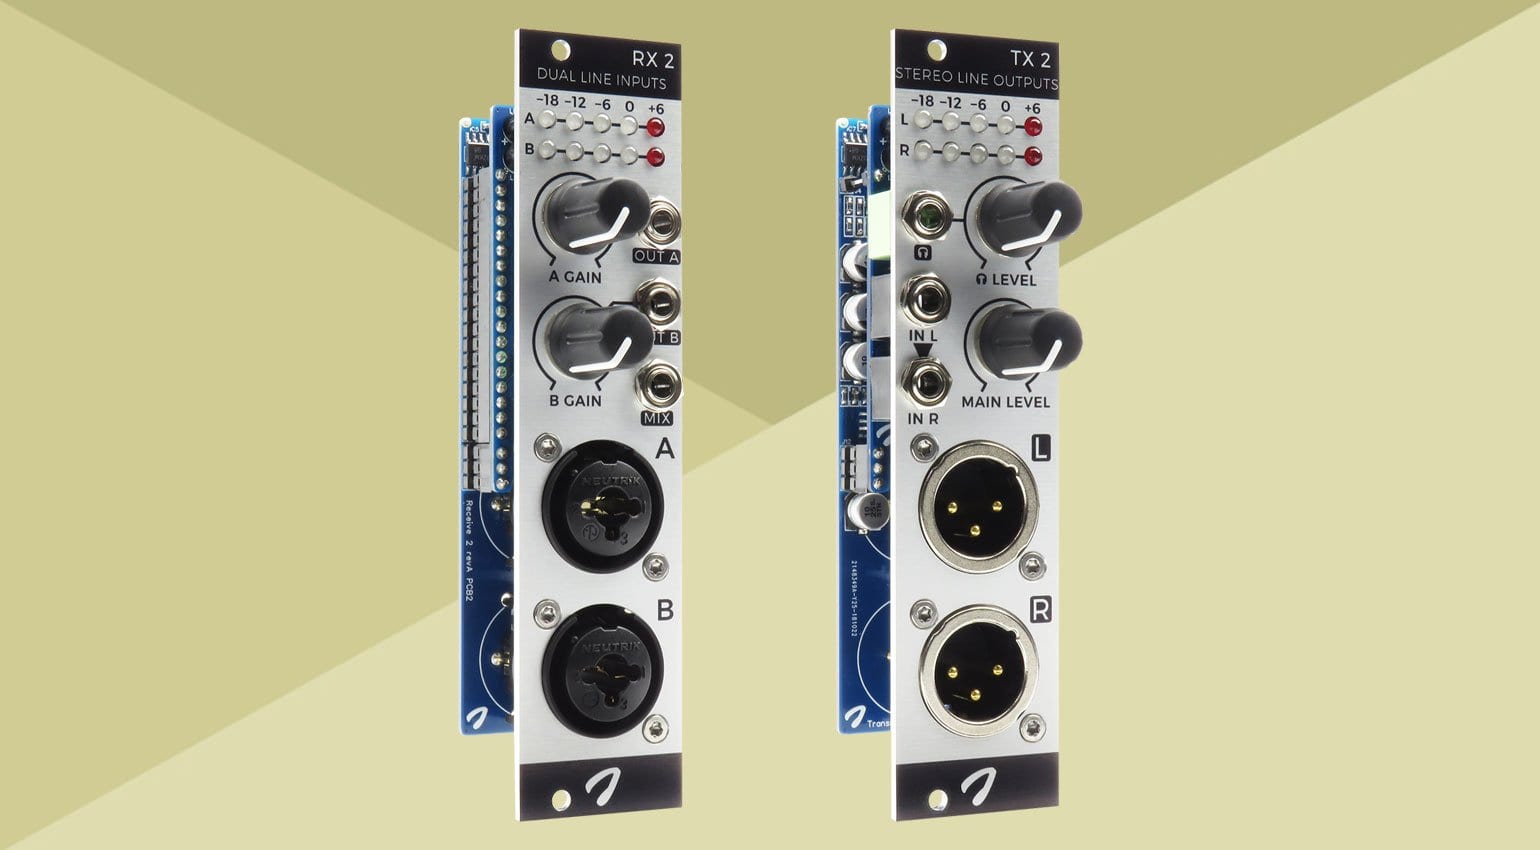 Receive 2 and Transmit 2 - stereo inputs and outputs for your 